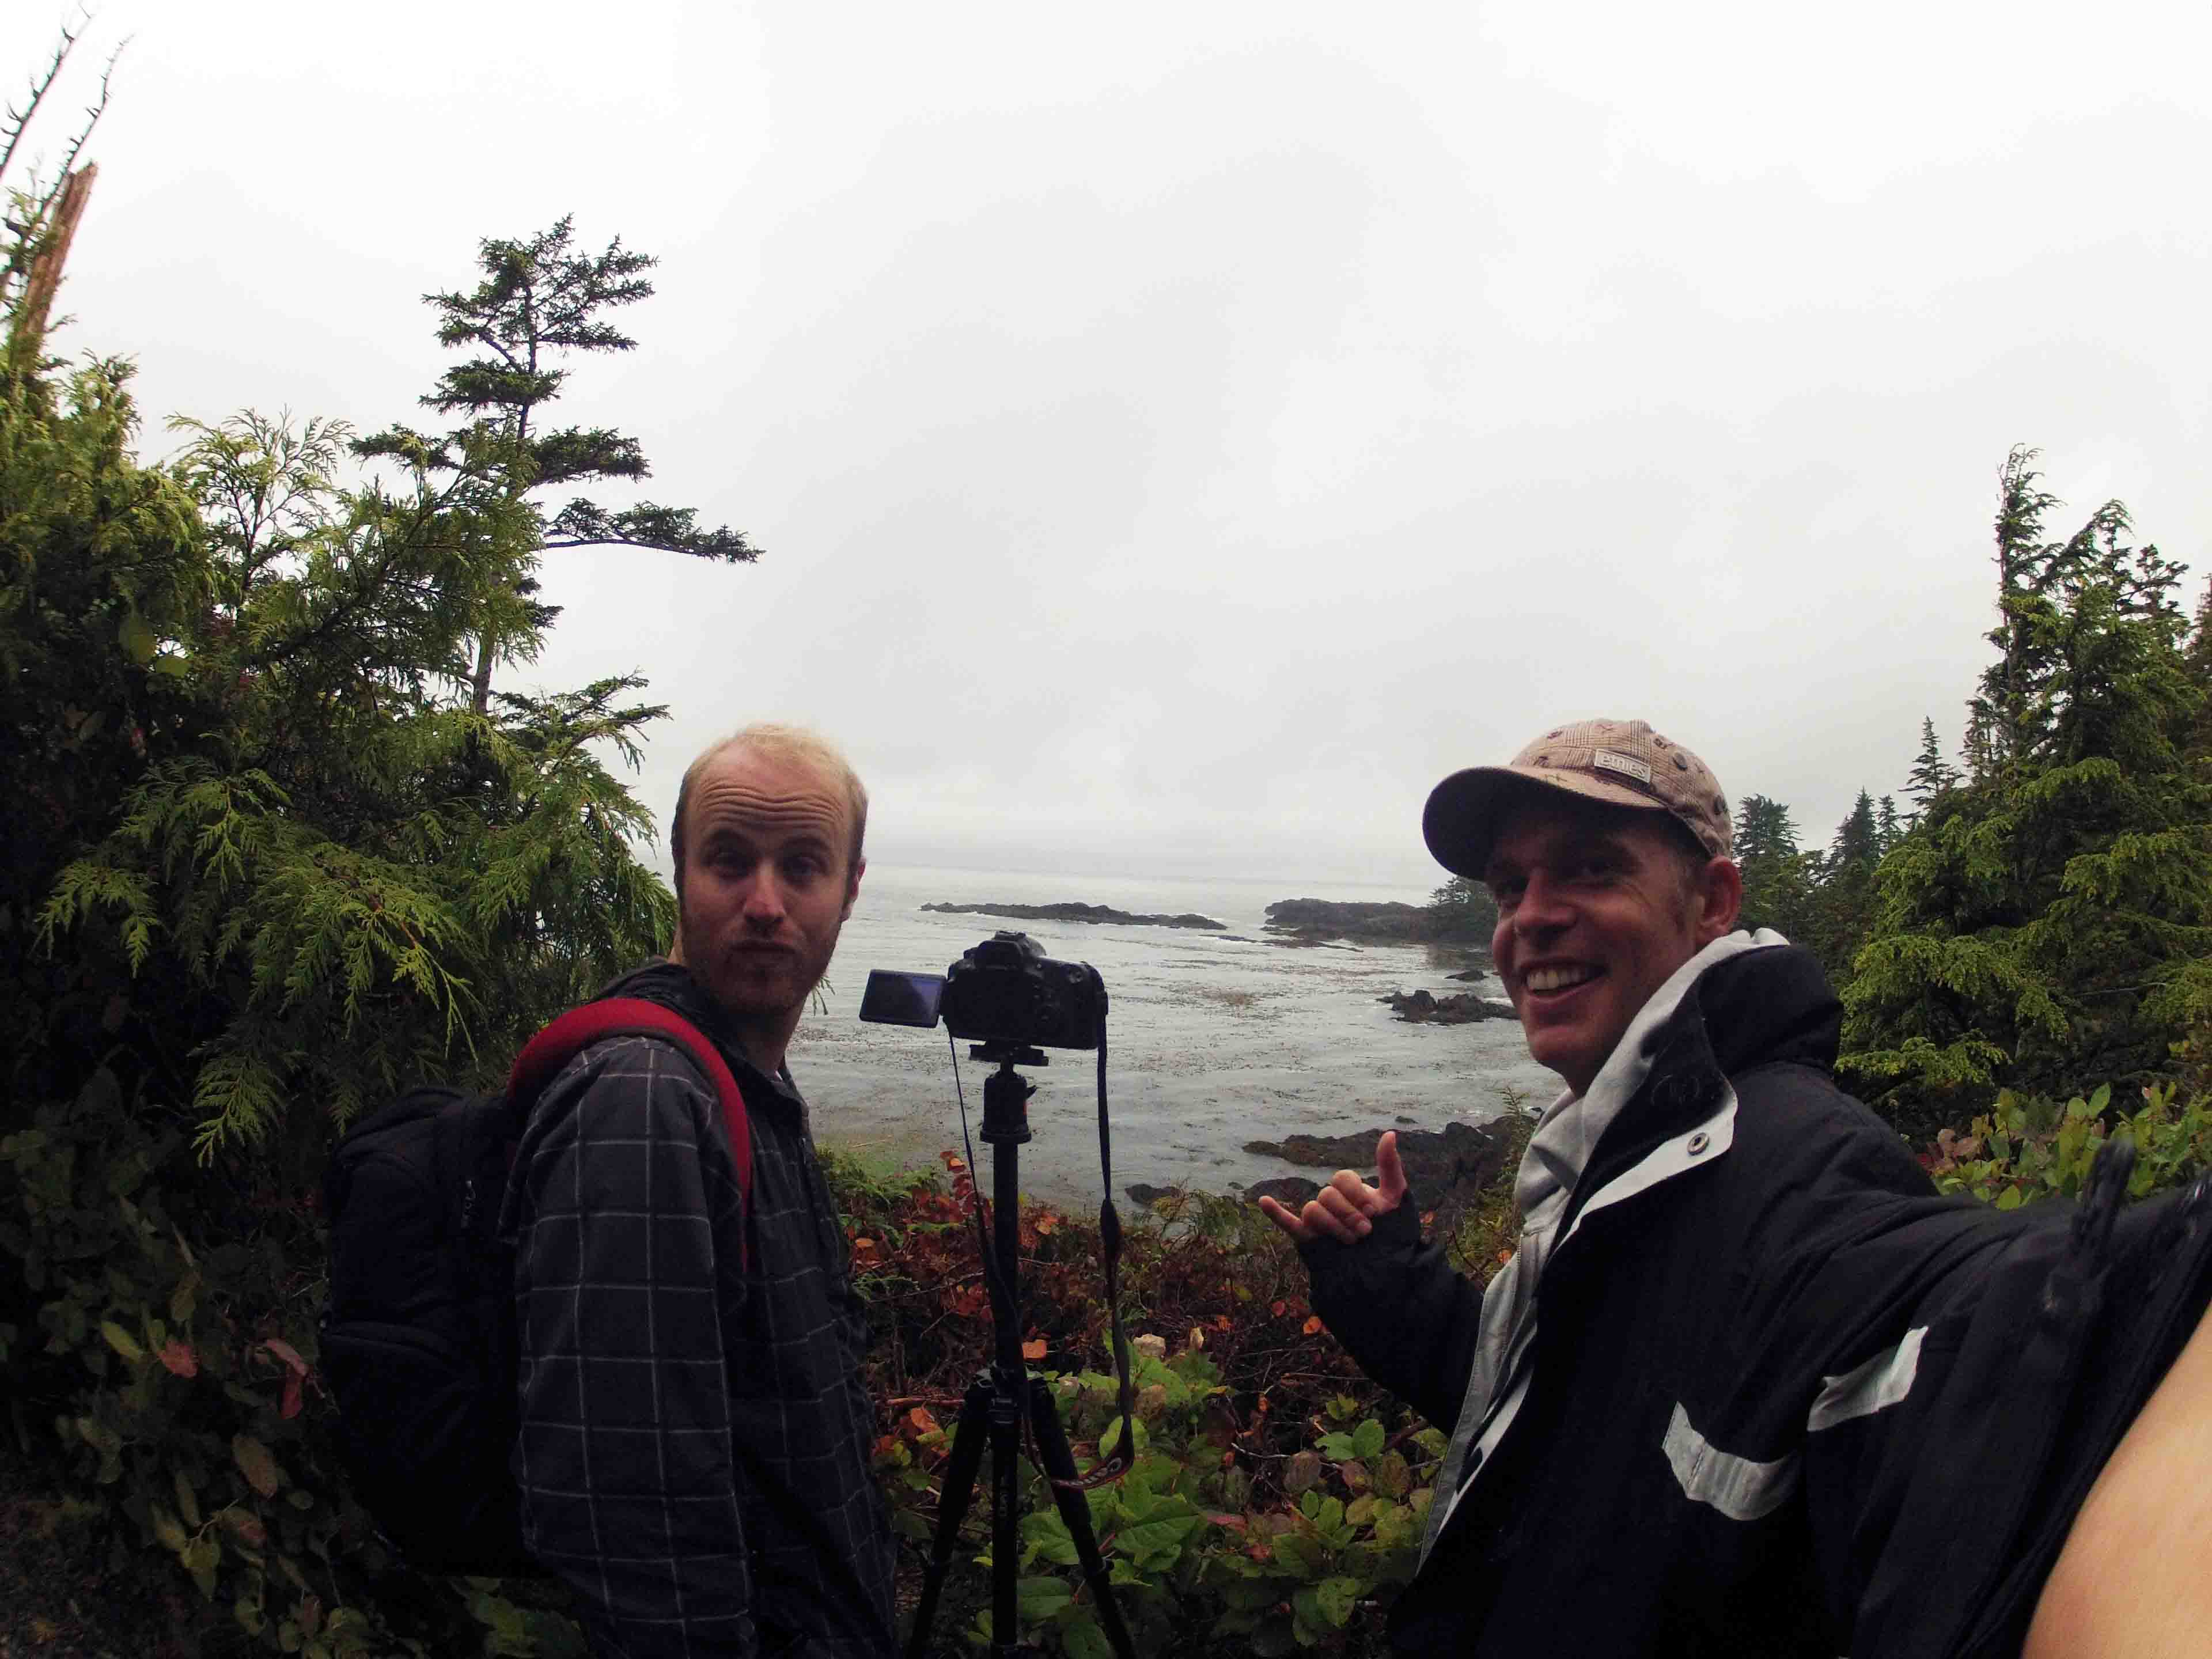 Hiking the Wild Pacific Trail in Ucluelet in British Columbia